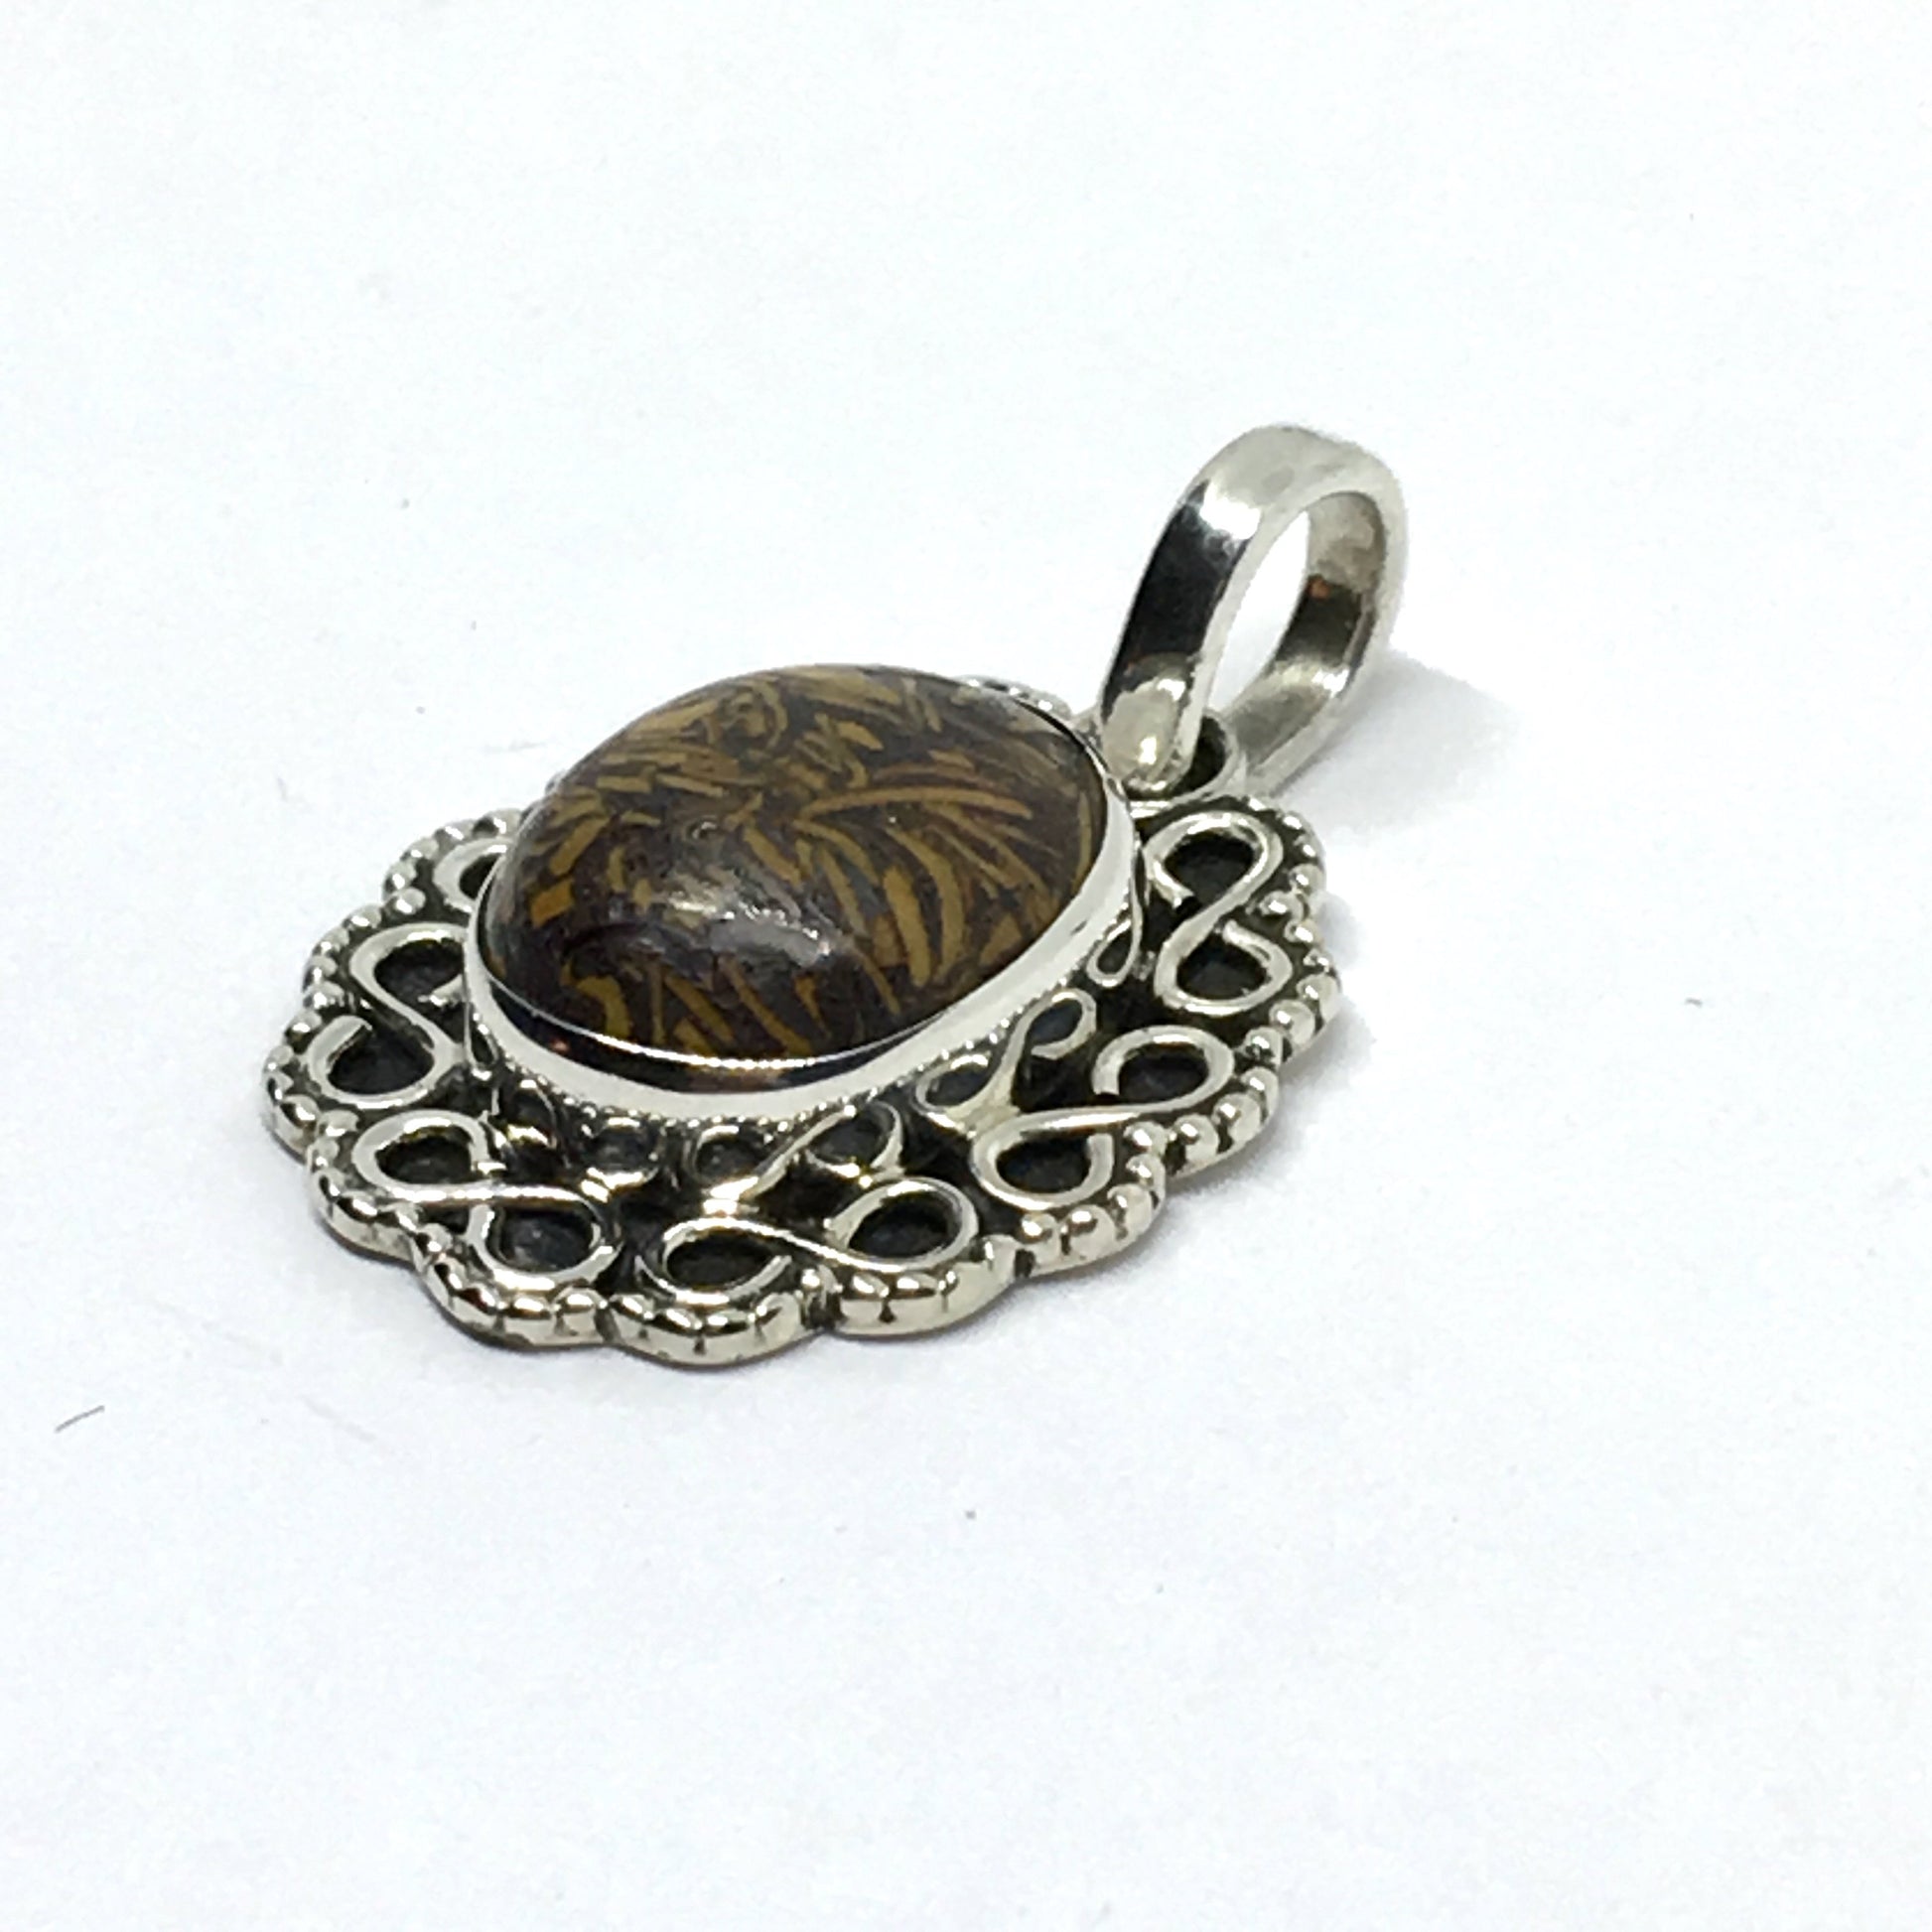 Jewelry - Used Sterling Silver Unique Matrixed Chrysanthemum Stone Pendant - online 